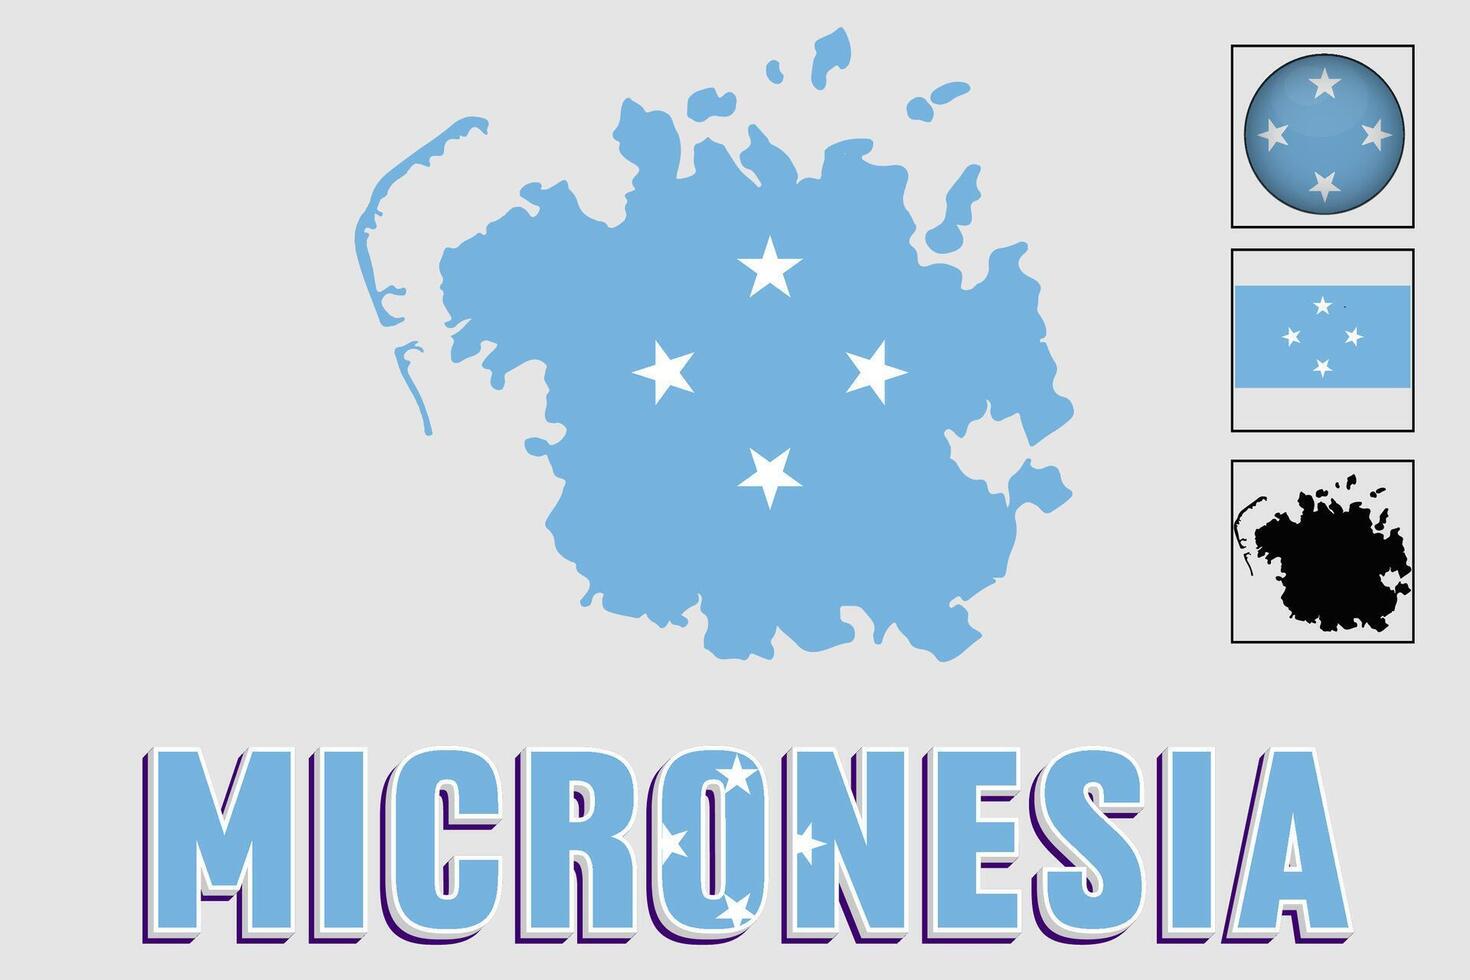 Micronesia flag and map in a vector graphic